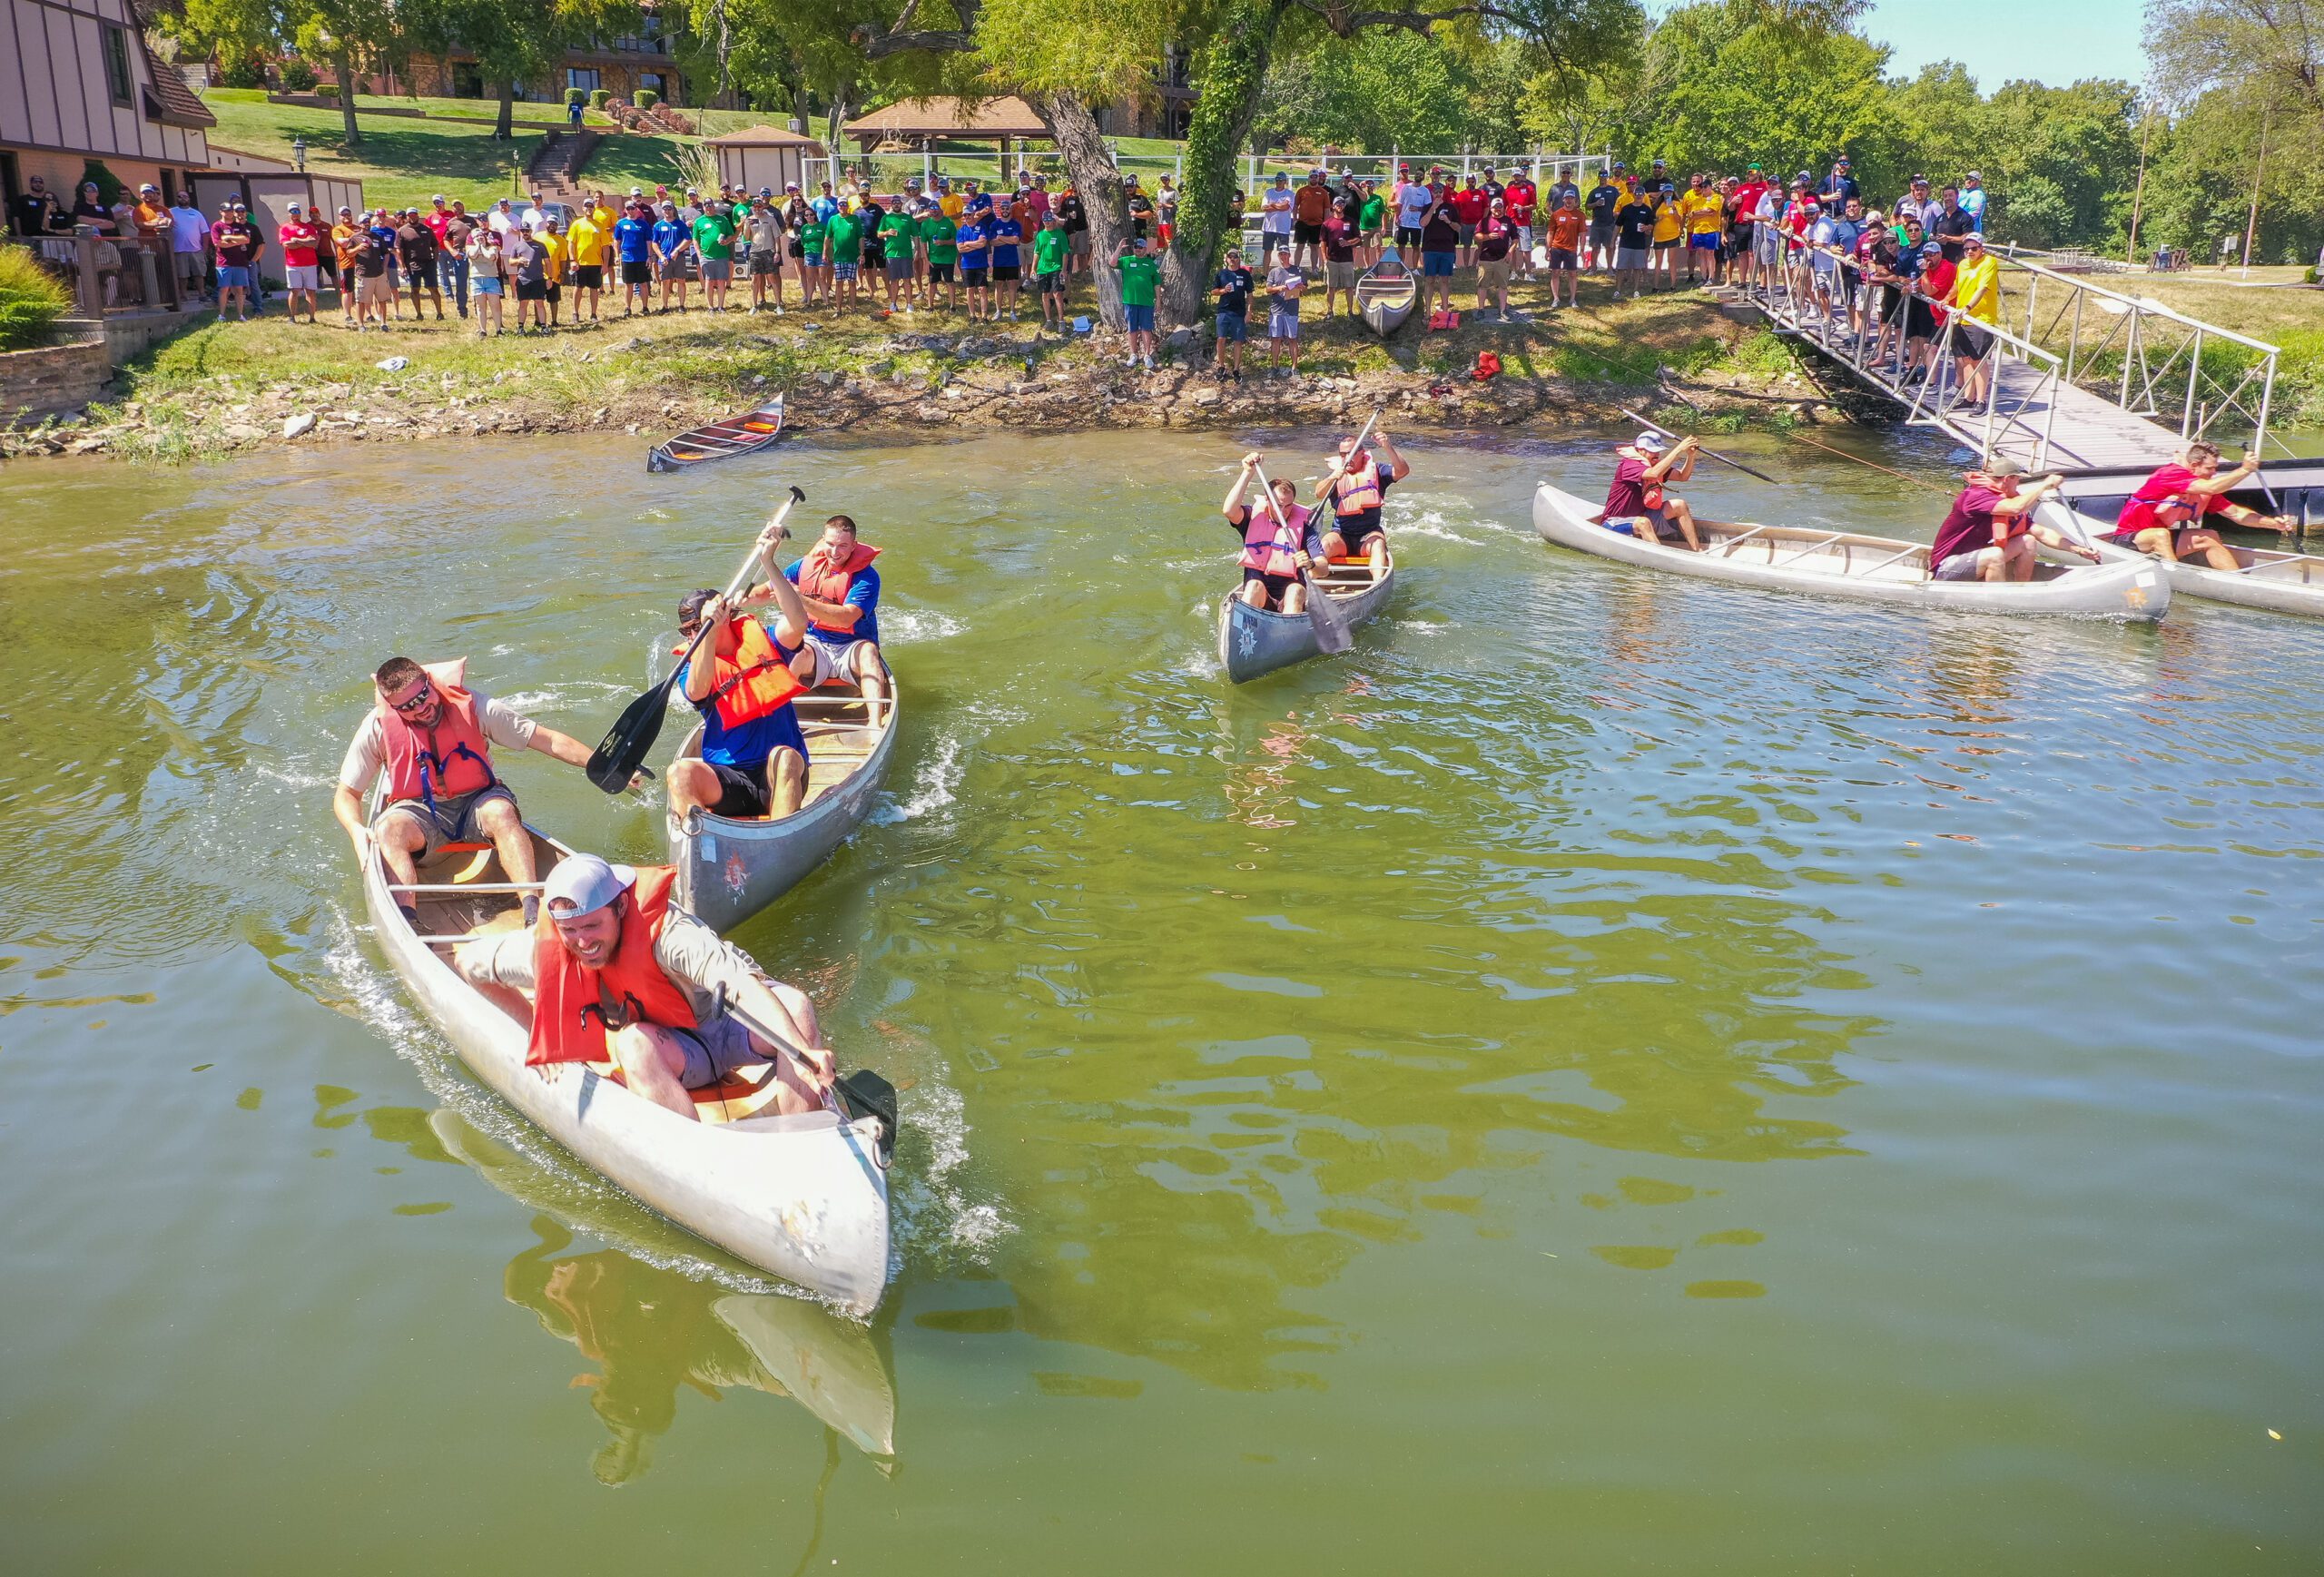 A group of people in canoes.